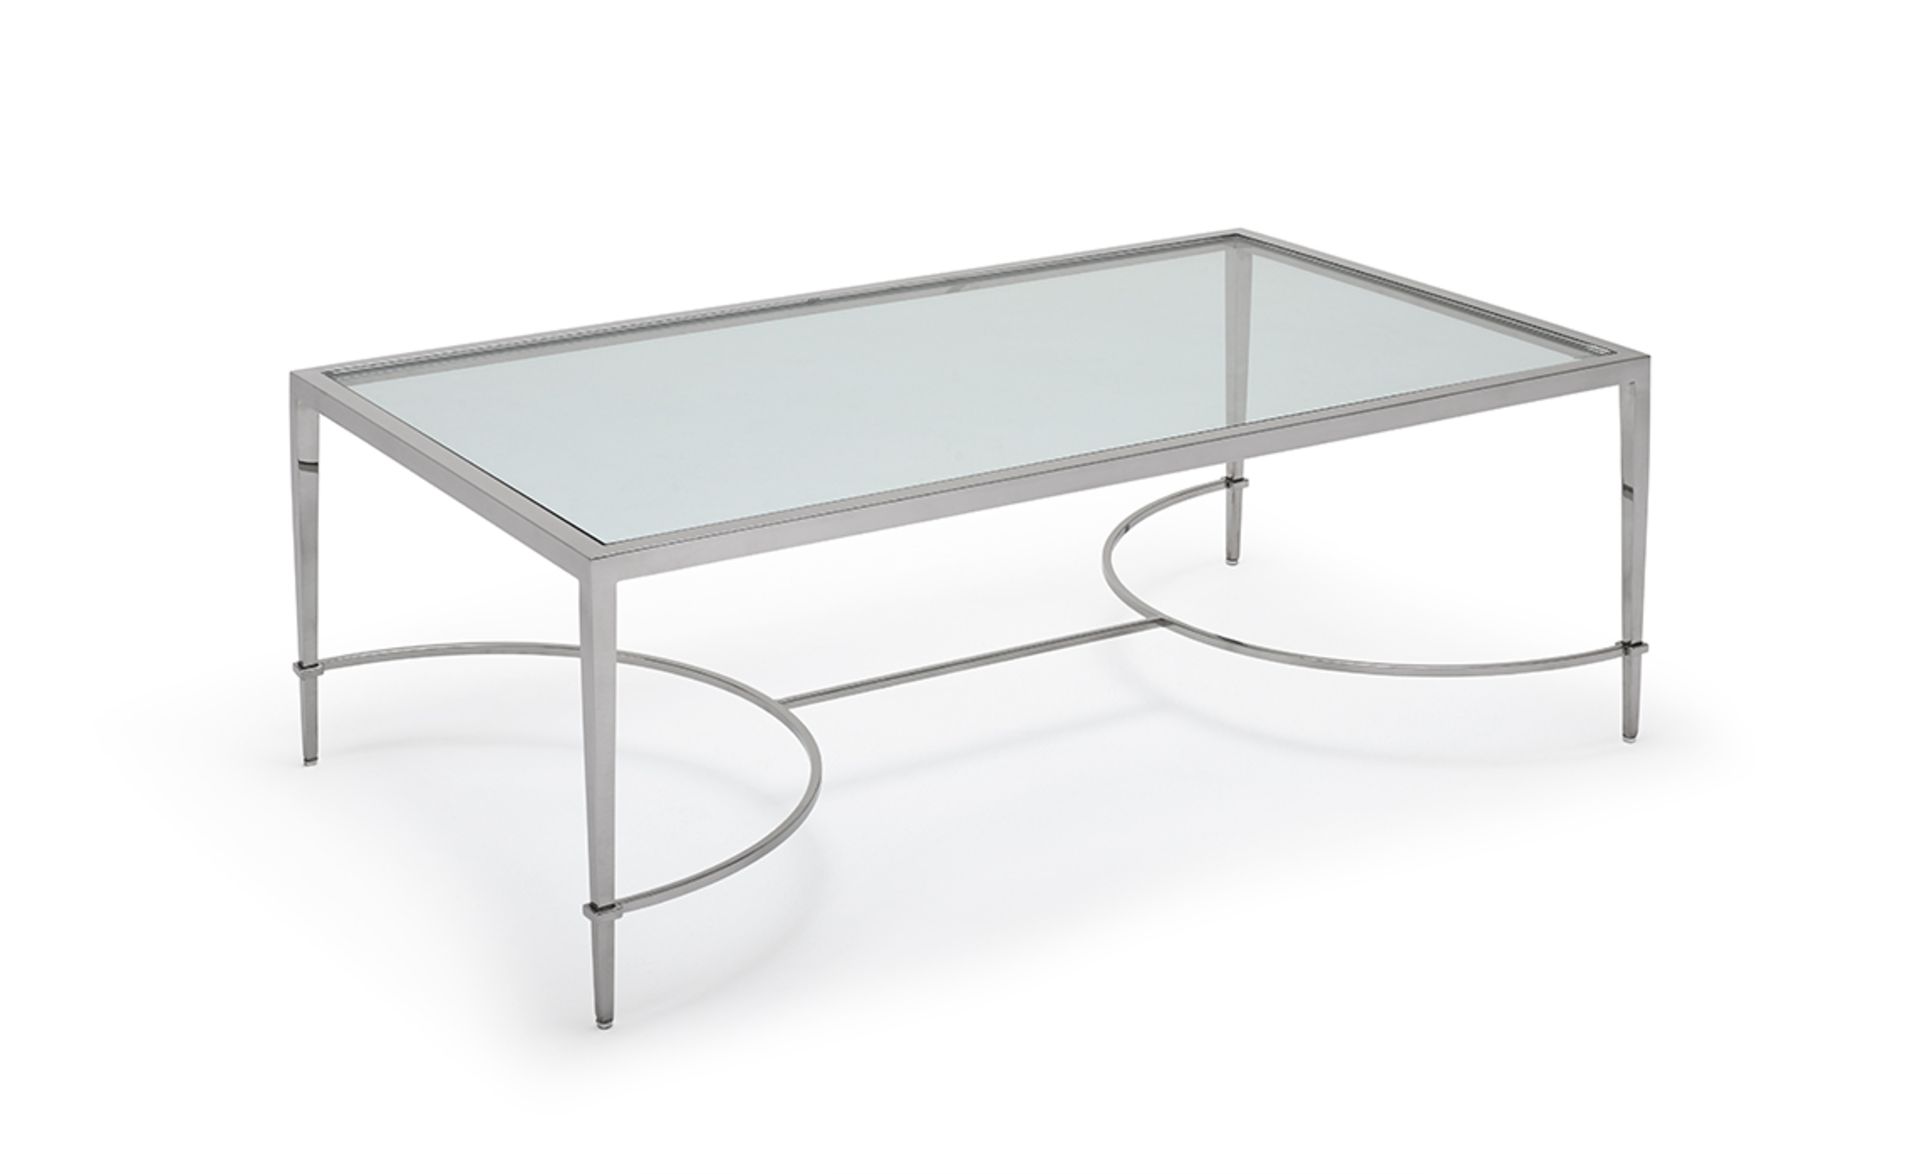 Tokyo Coffee Table by Kesterport The Tokyo coffee table with its clear glass top and a refined - Bild 6 aus 6